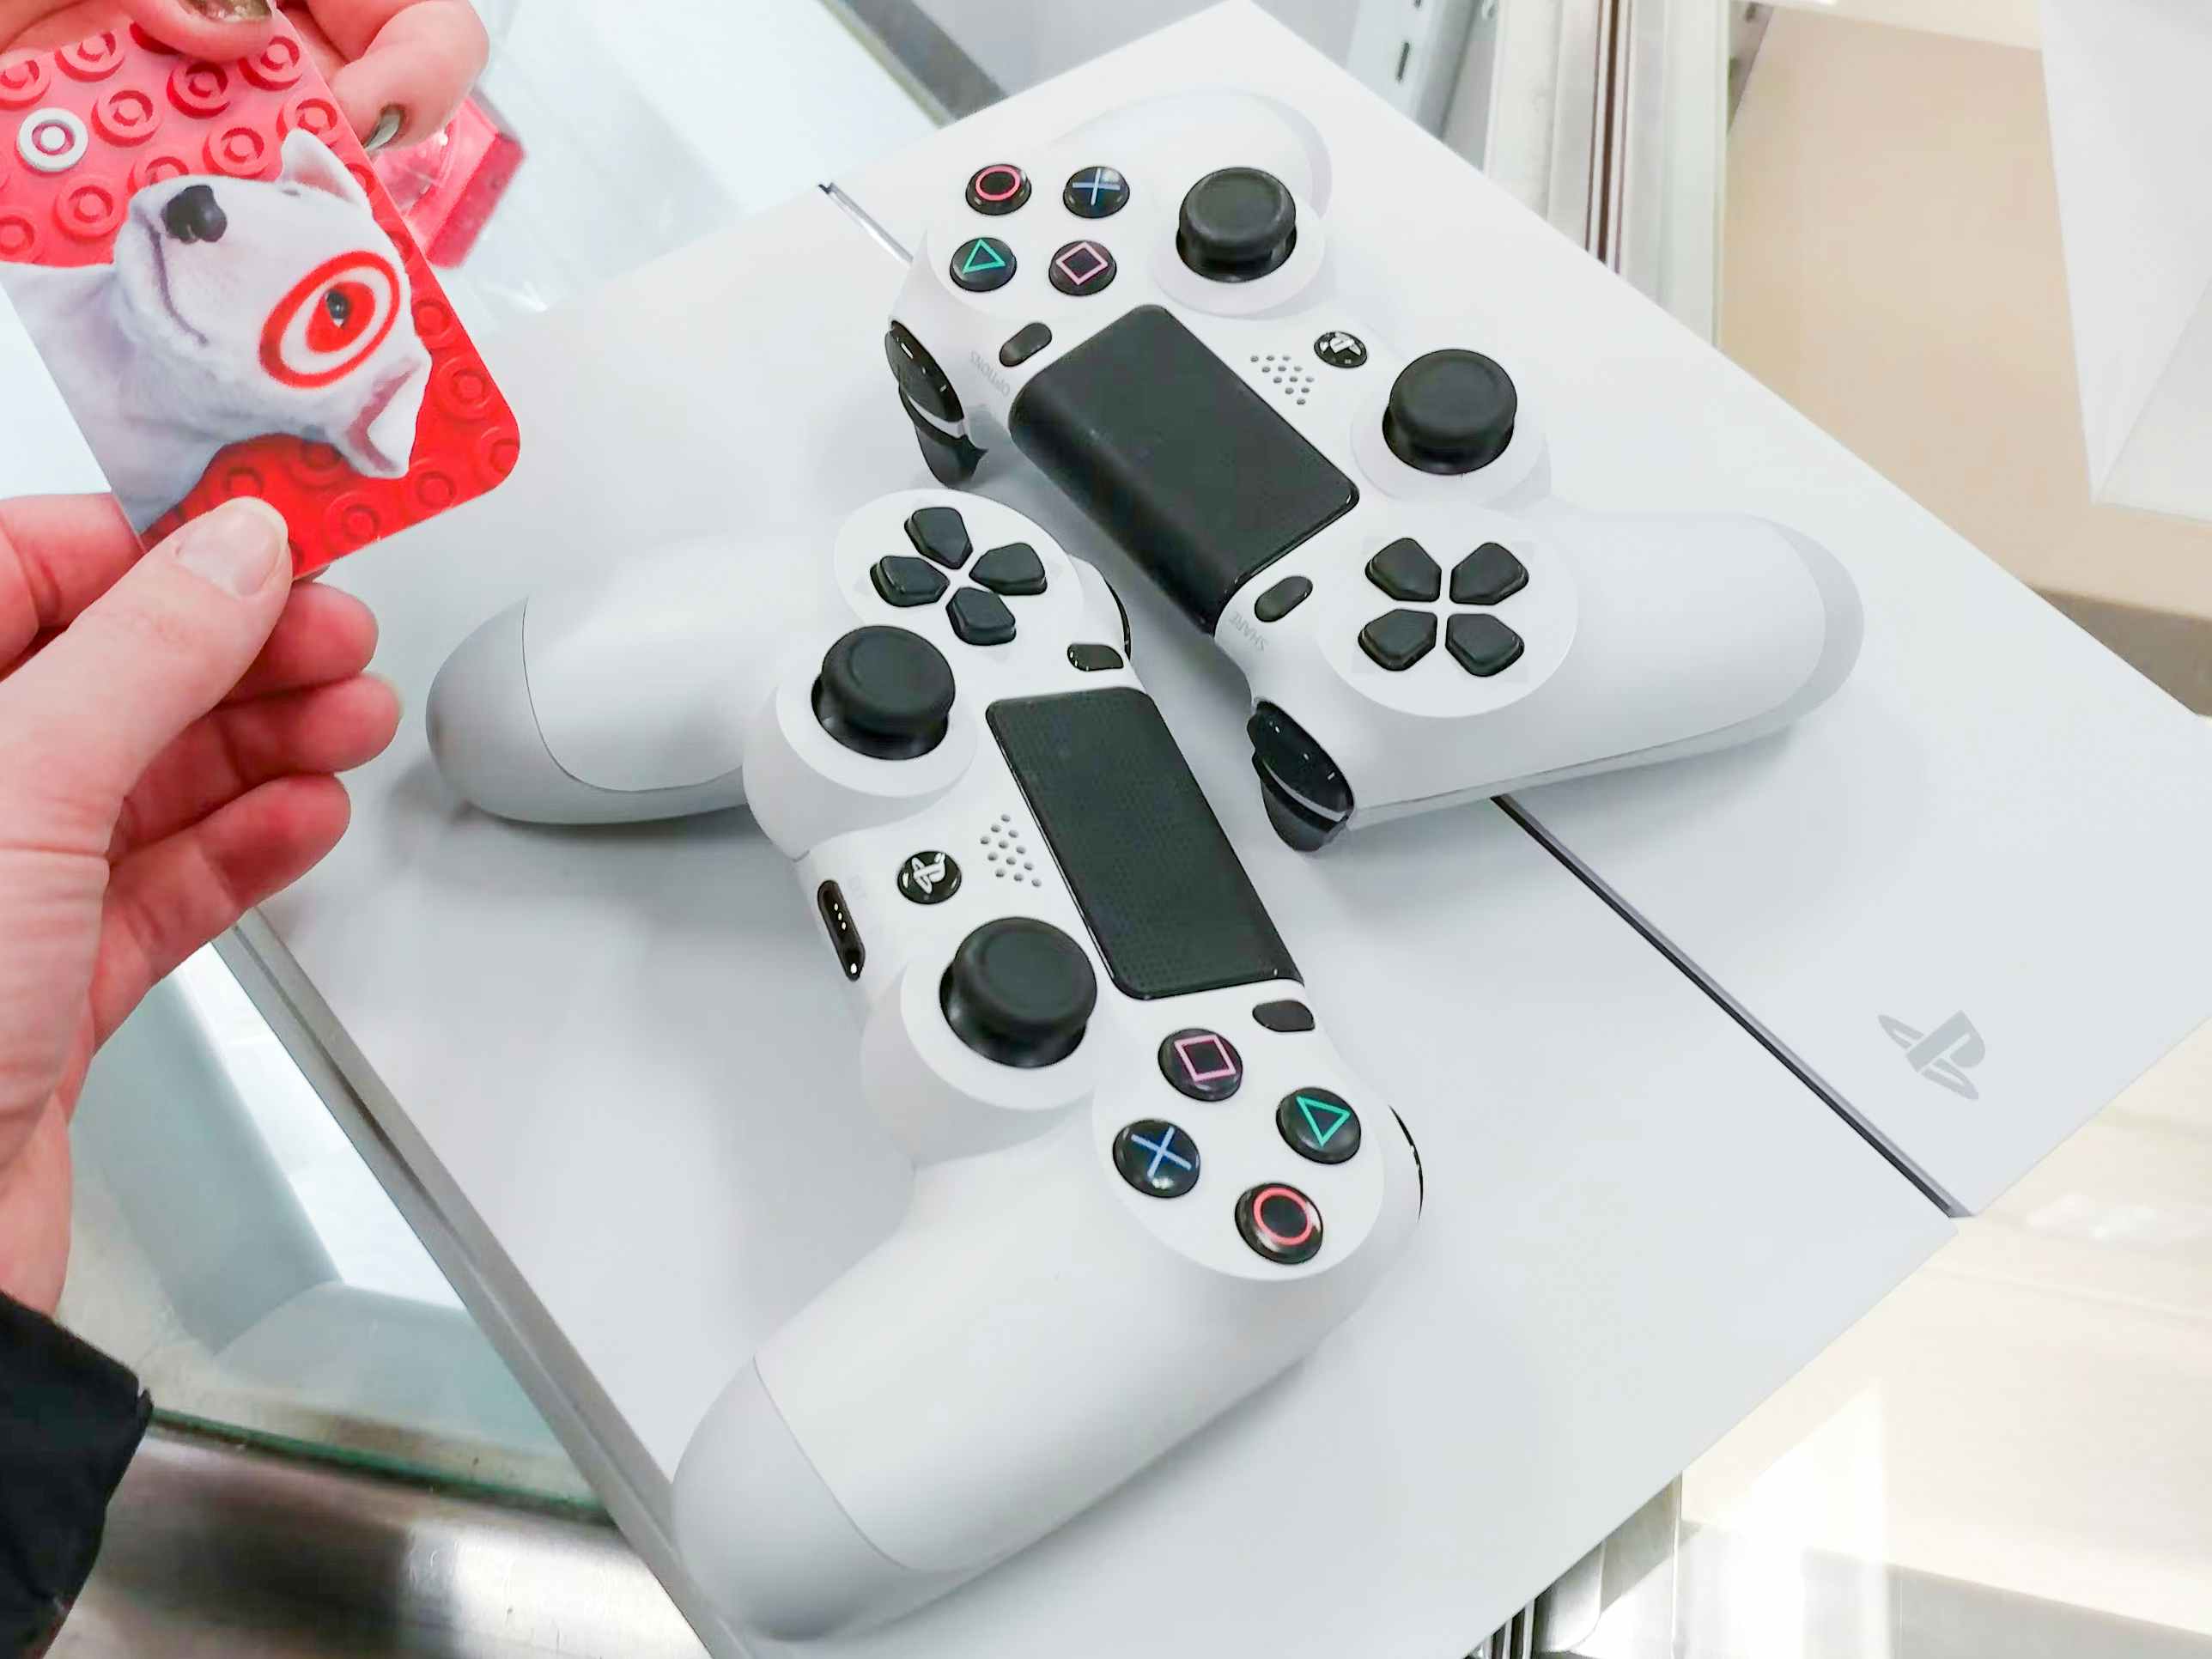 An old PlayStation gaming console and two controllers on the counter with a hand holding a target gift card